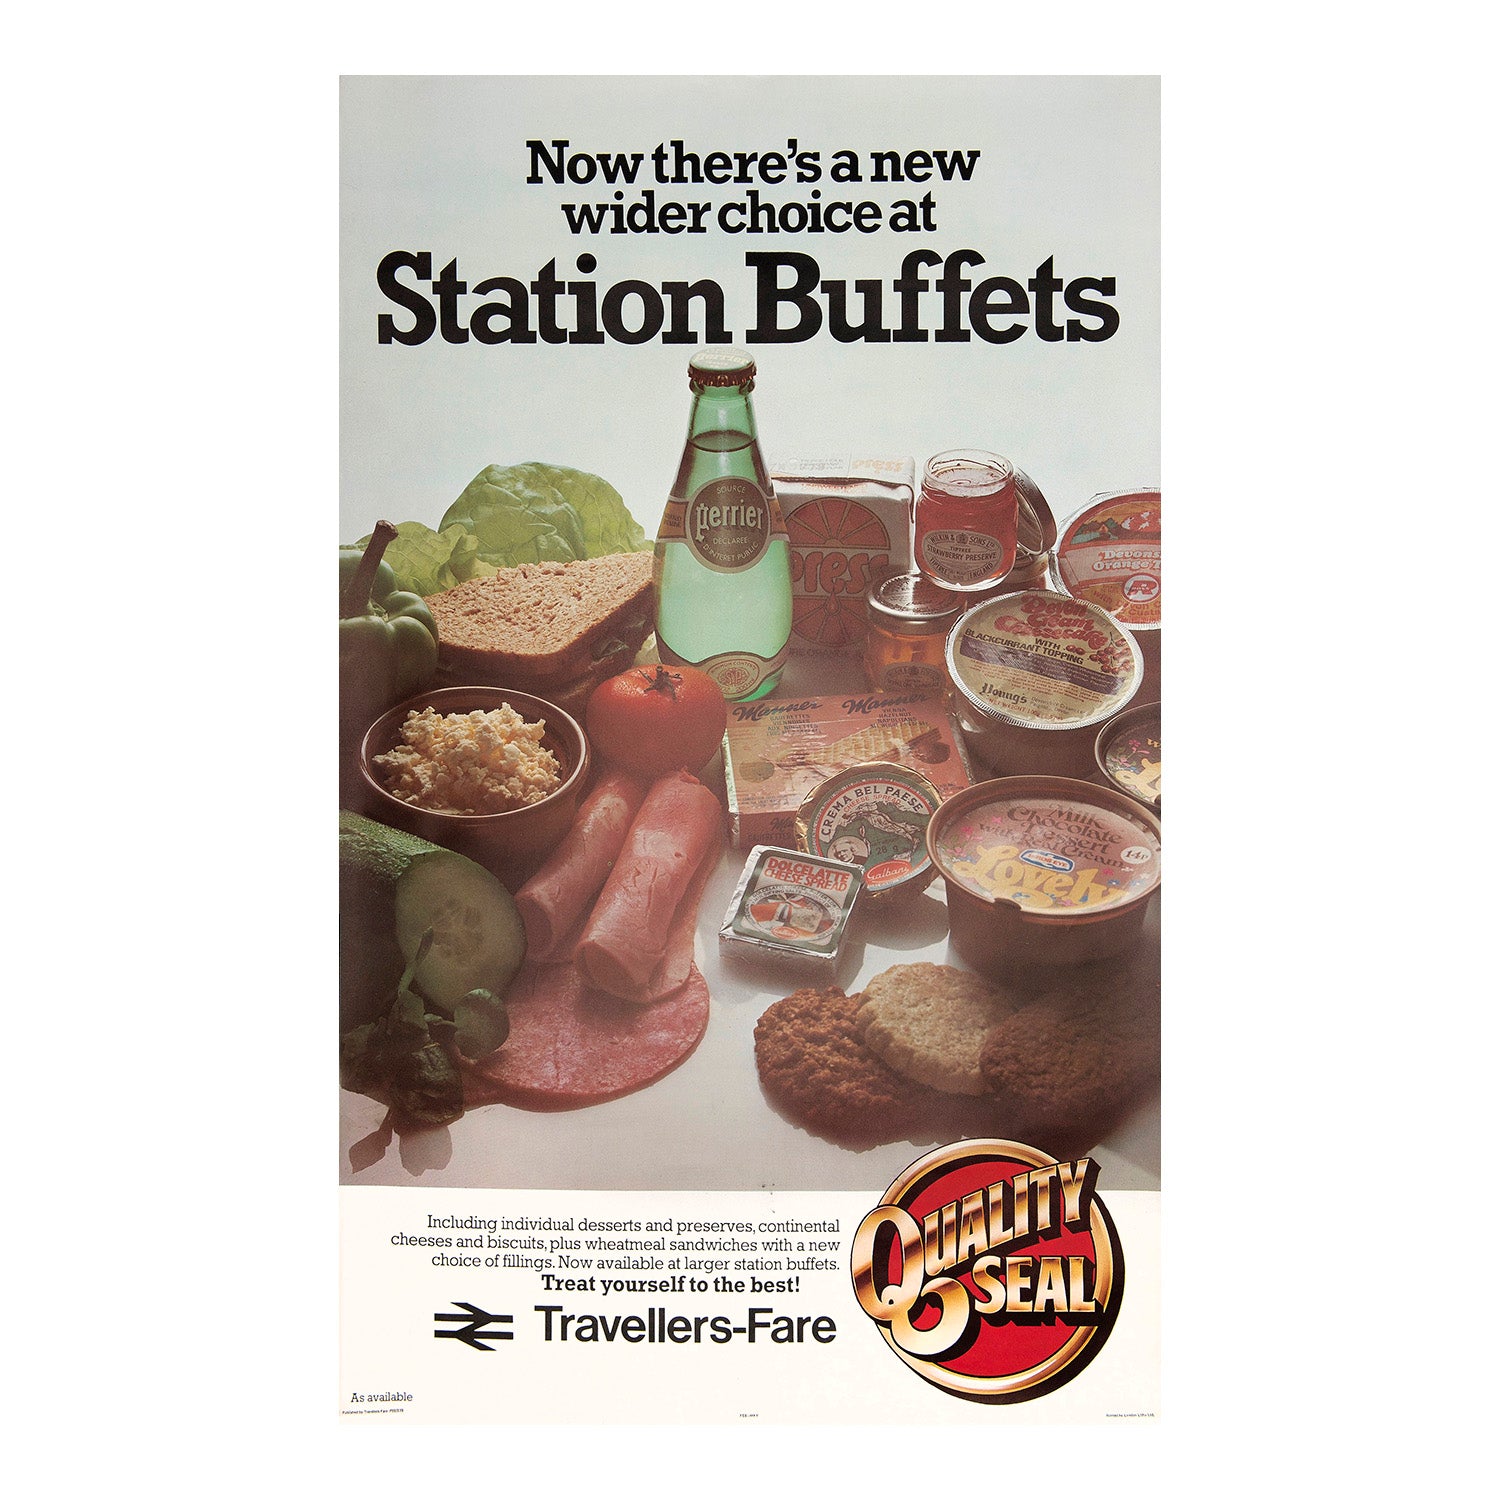 Now there's a new wider choice at Station Buffets. Travellers Fare